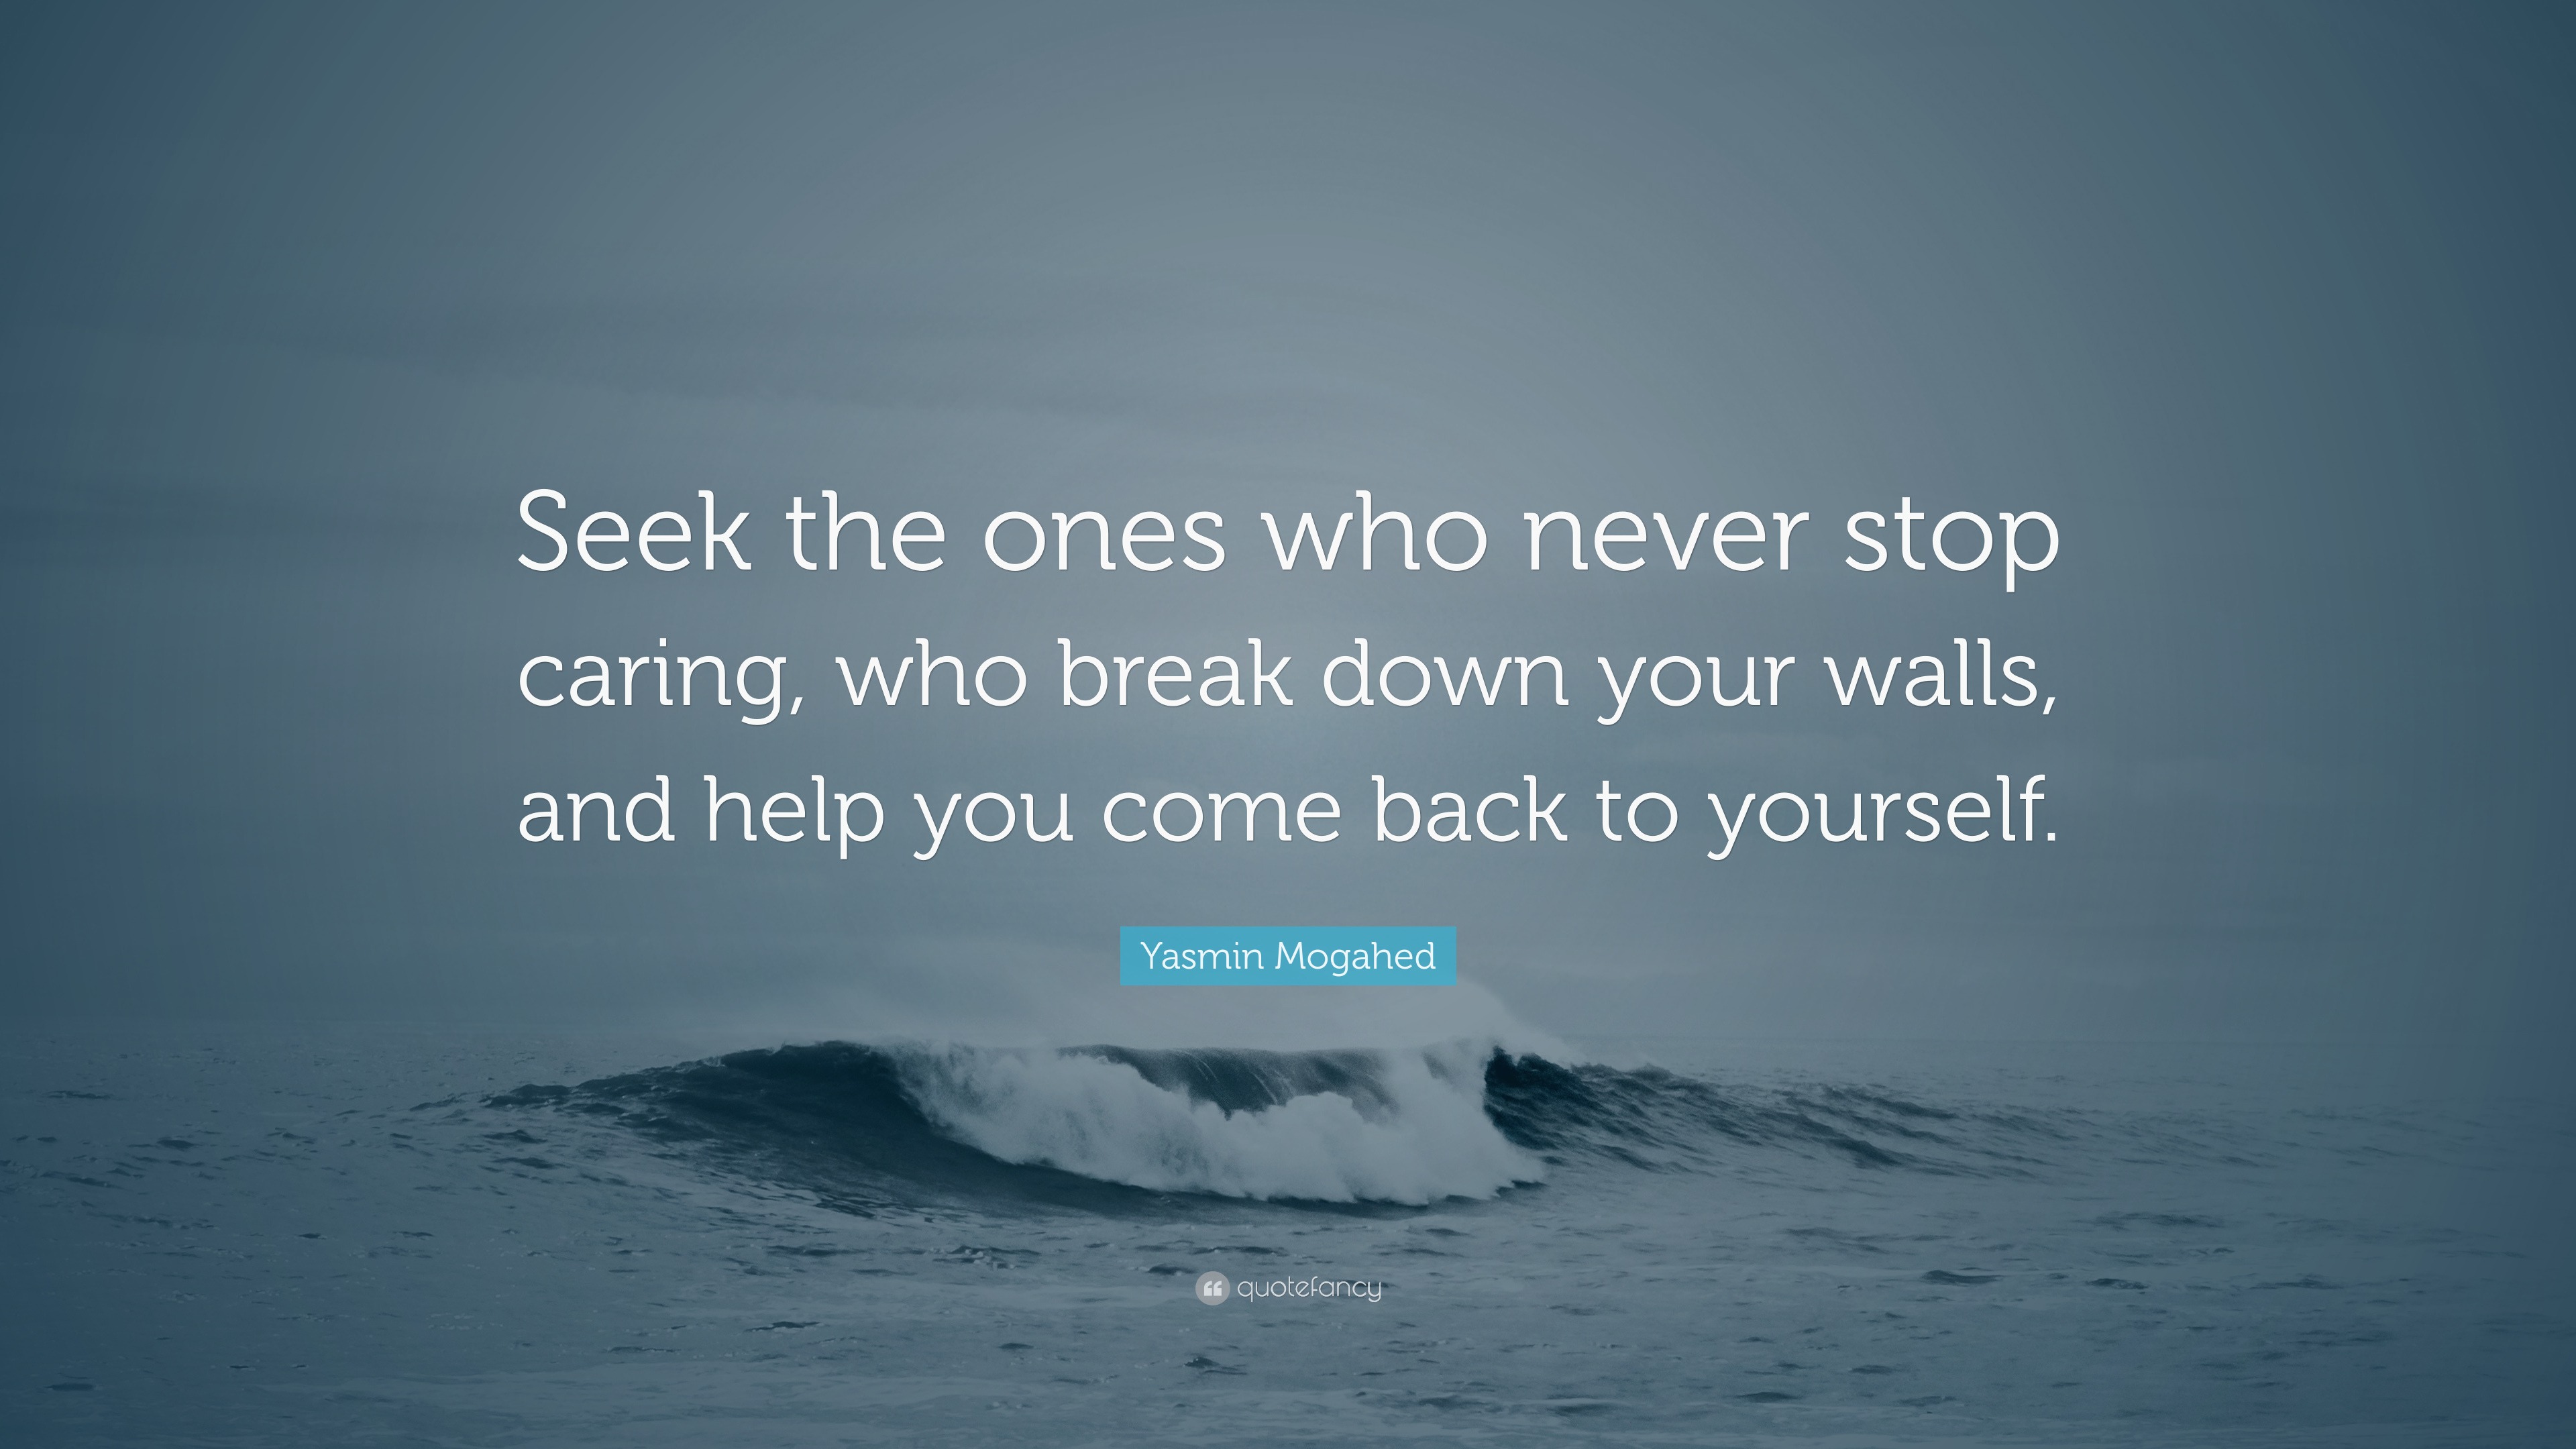 Yasmin Mogahed Quote Seek The Ones Who Never Stop Caring Who Break Down Your Walls And Help You Come Back To Yourself 9 Wallpapers Quotefancy